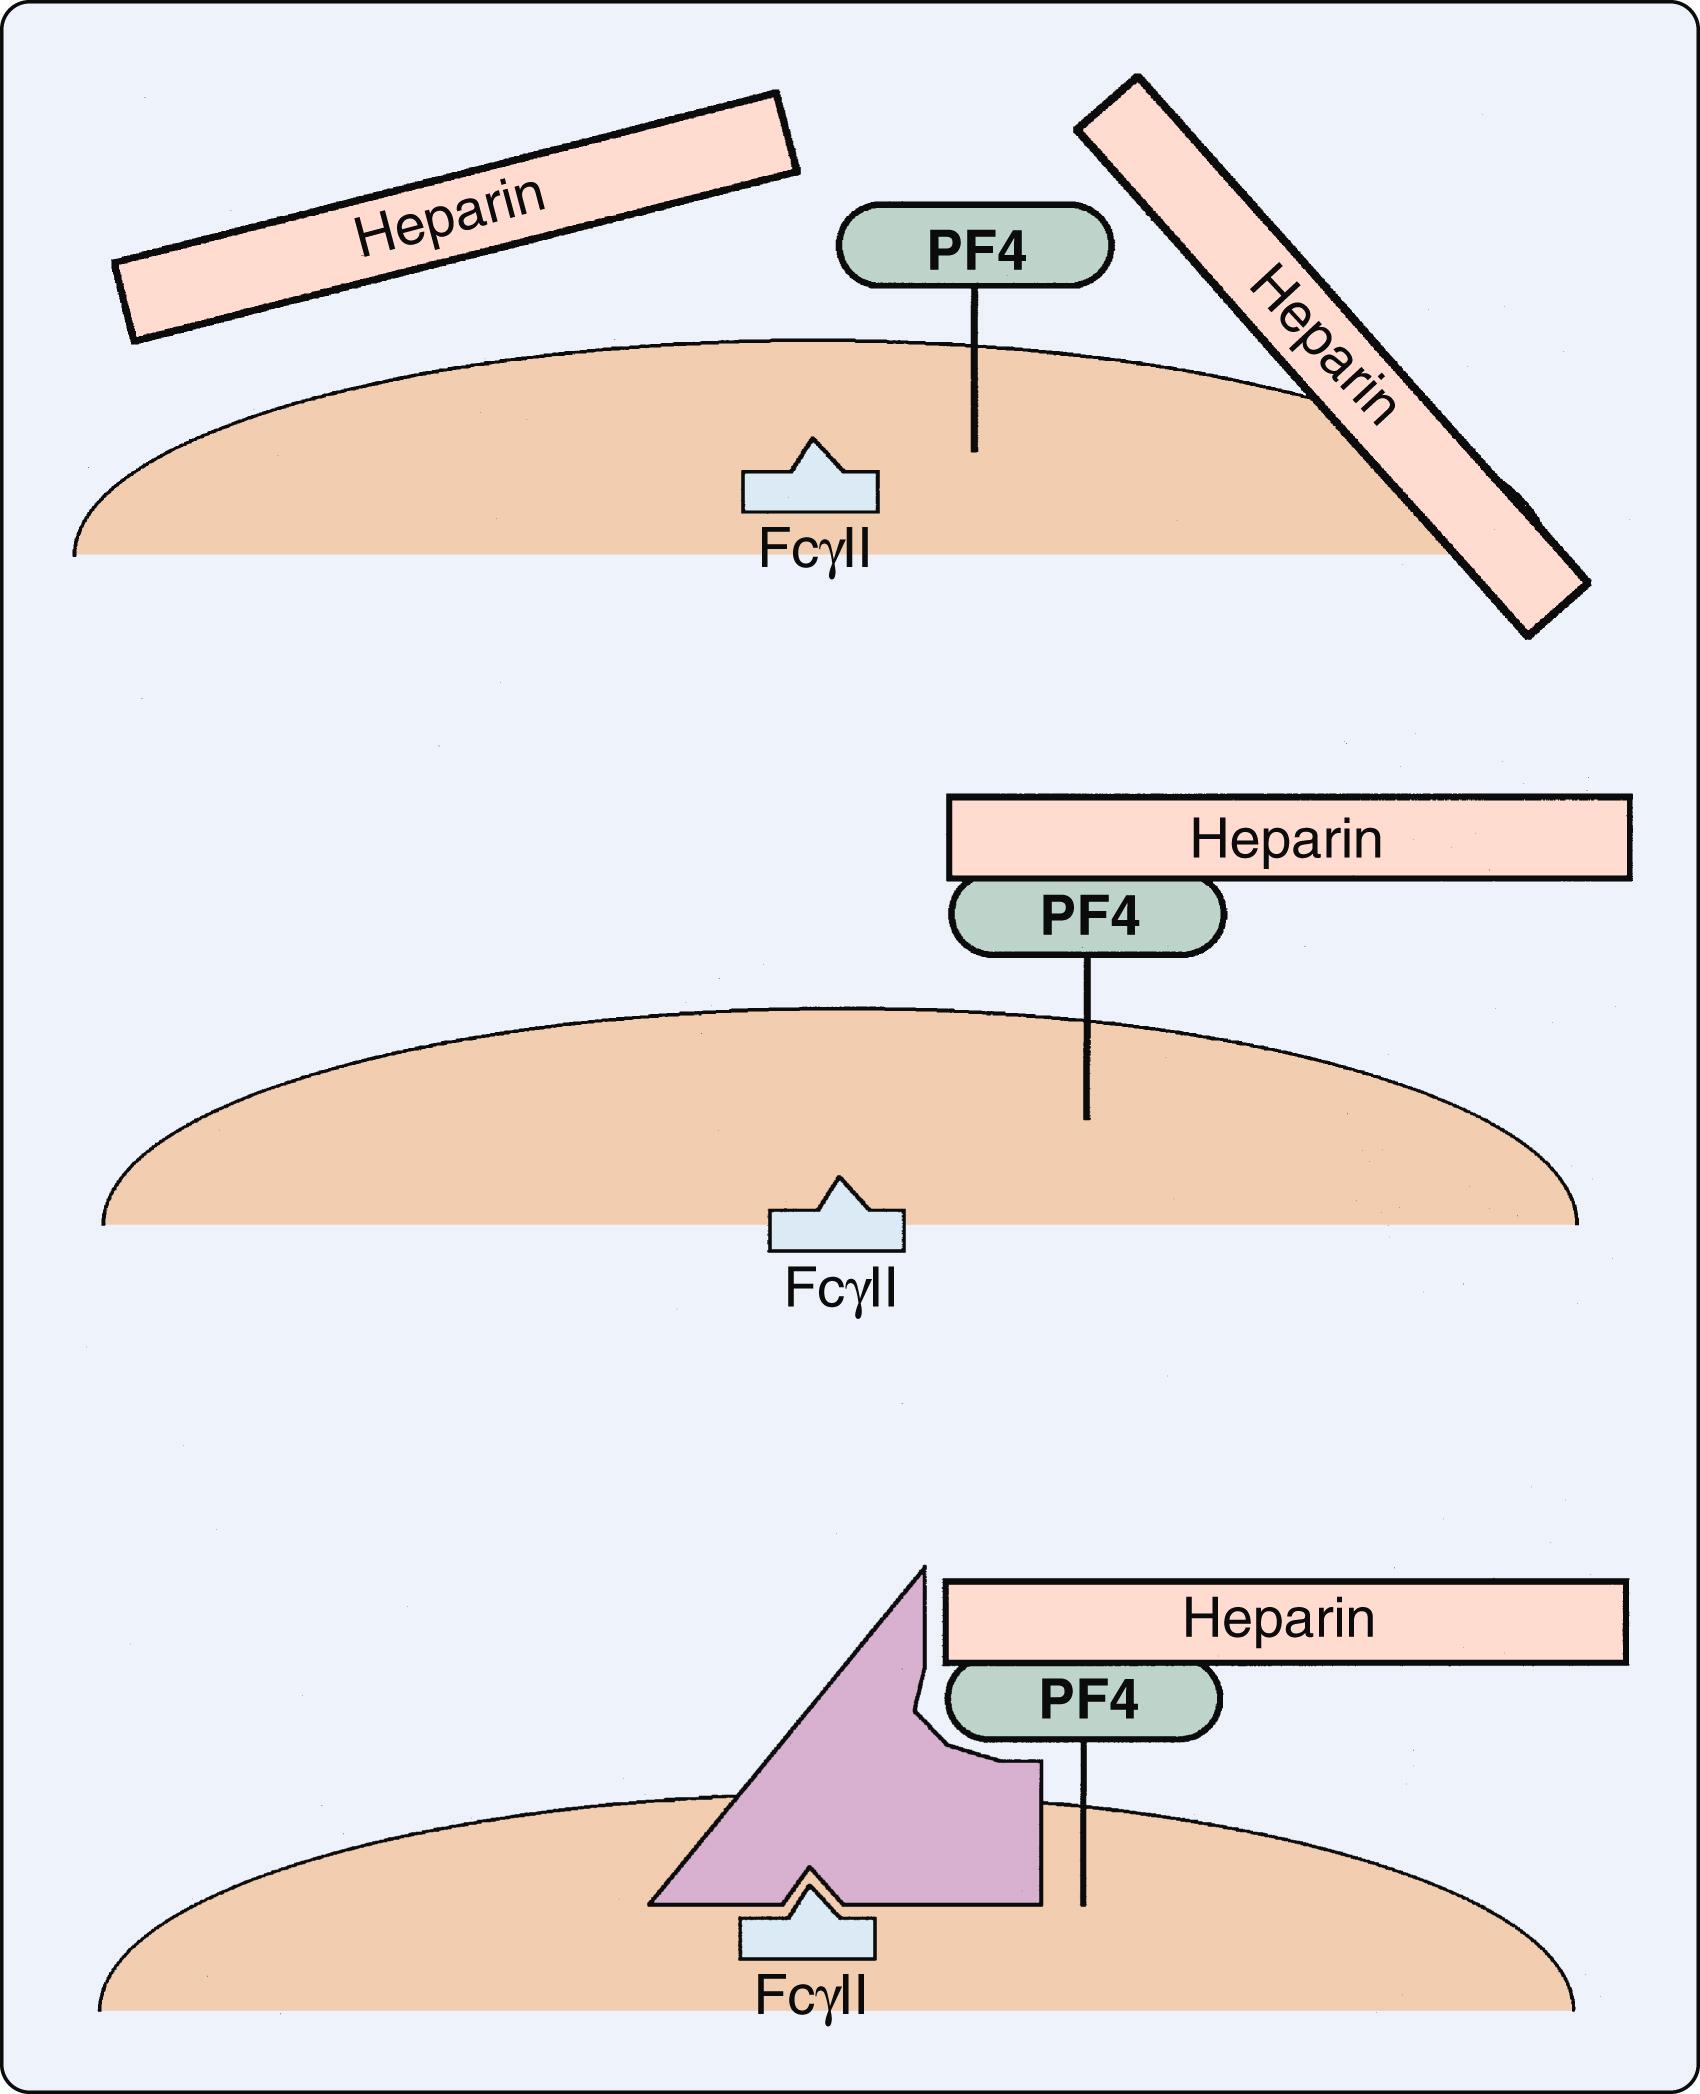 Figure 28.9, The pathogenesis of heparin-induced thrombocytopenia. Top panel: Platelet factor 4 (PF4) released from platelet granules is bound to the platelet surface. Middle panel: Heparin and PF4 complexes form. Bottom panel: The antibody binds to the PF4-heparin complex and activates platelet FcγII receptors.